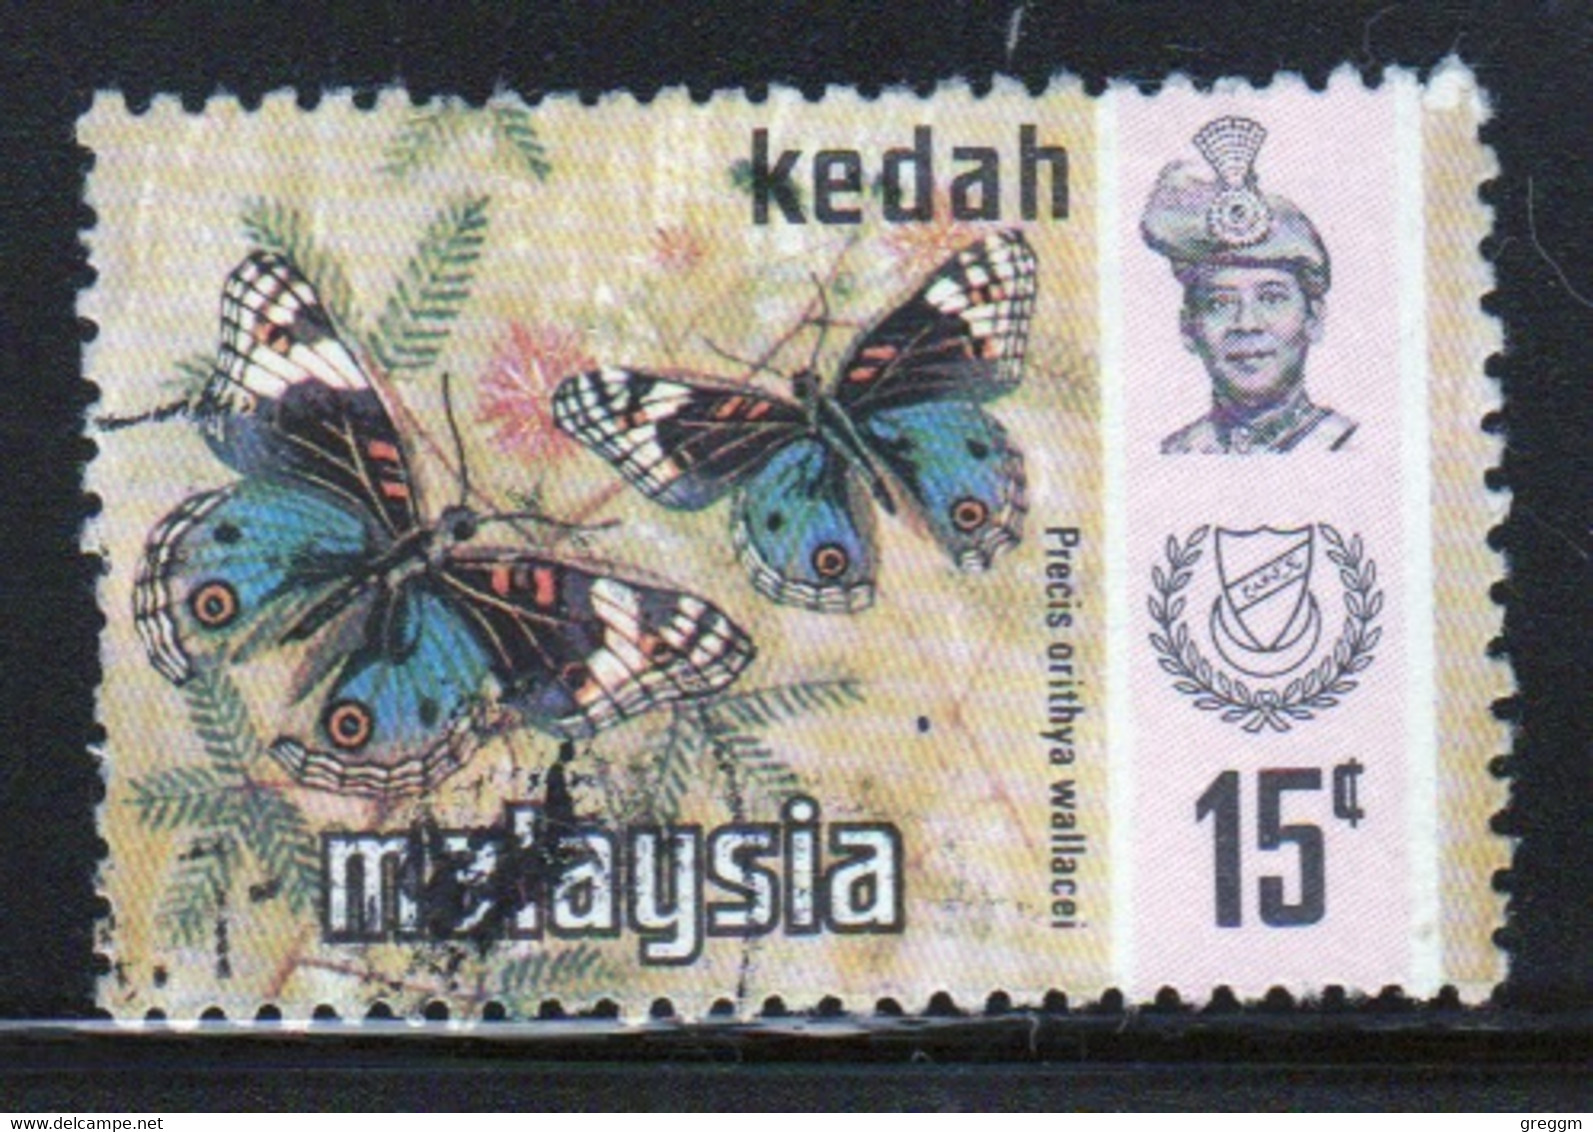 Malaysia Kedah 1971 Single 15c Commemorative Stamp Which Is I Believe Cat No 129 In Fine Used - Kedah